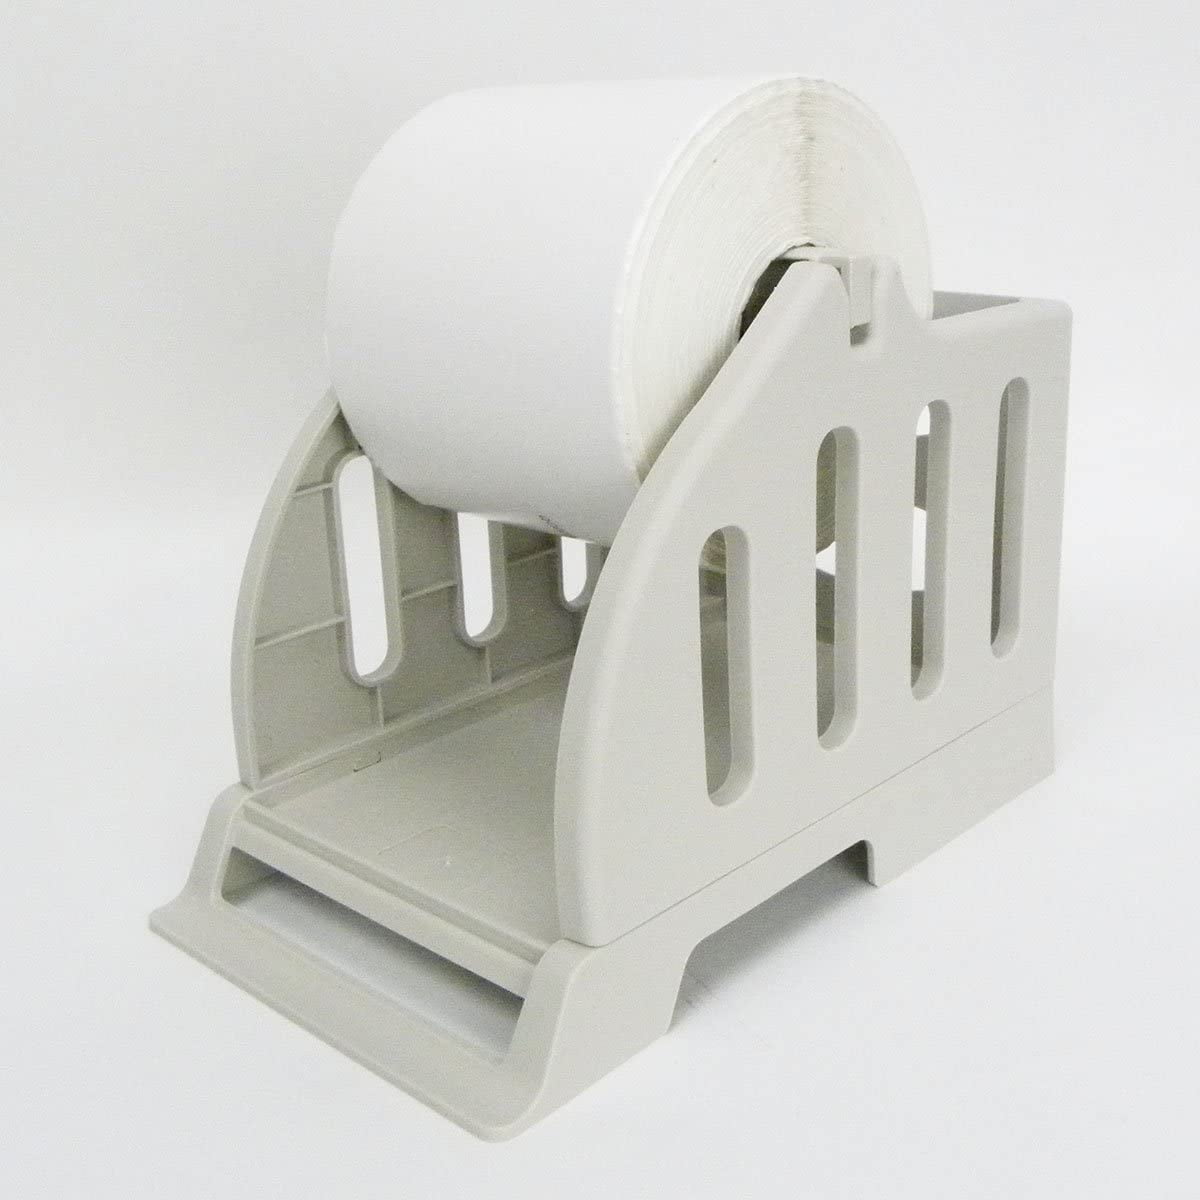 Label Holder for Rolls and Fan-Fold Labels Great for Desktop Thermal Printers 